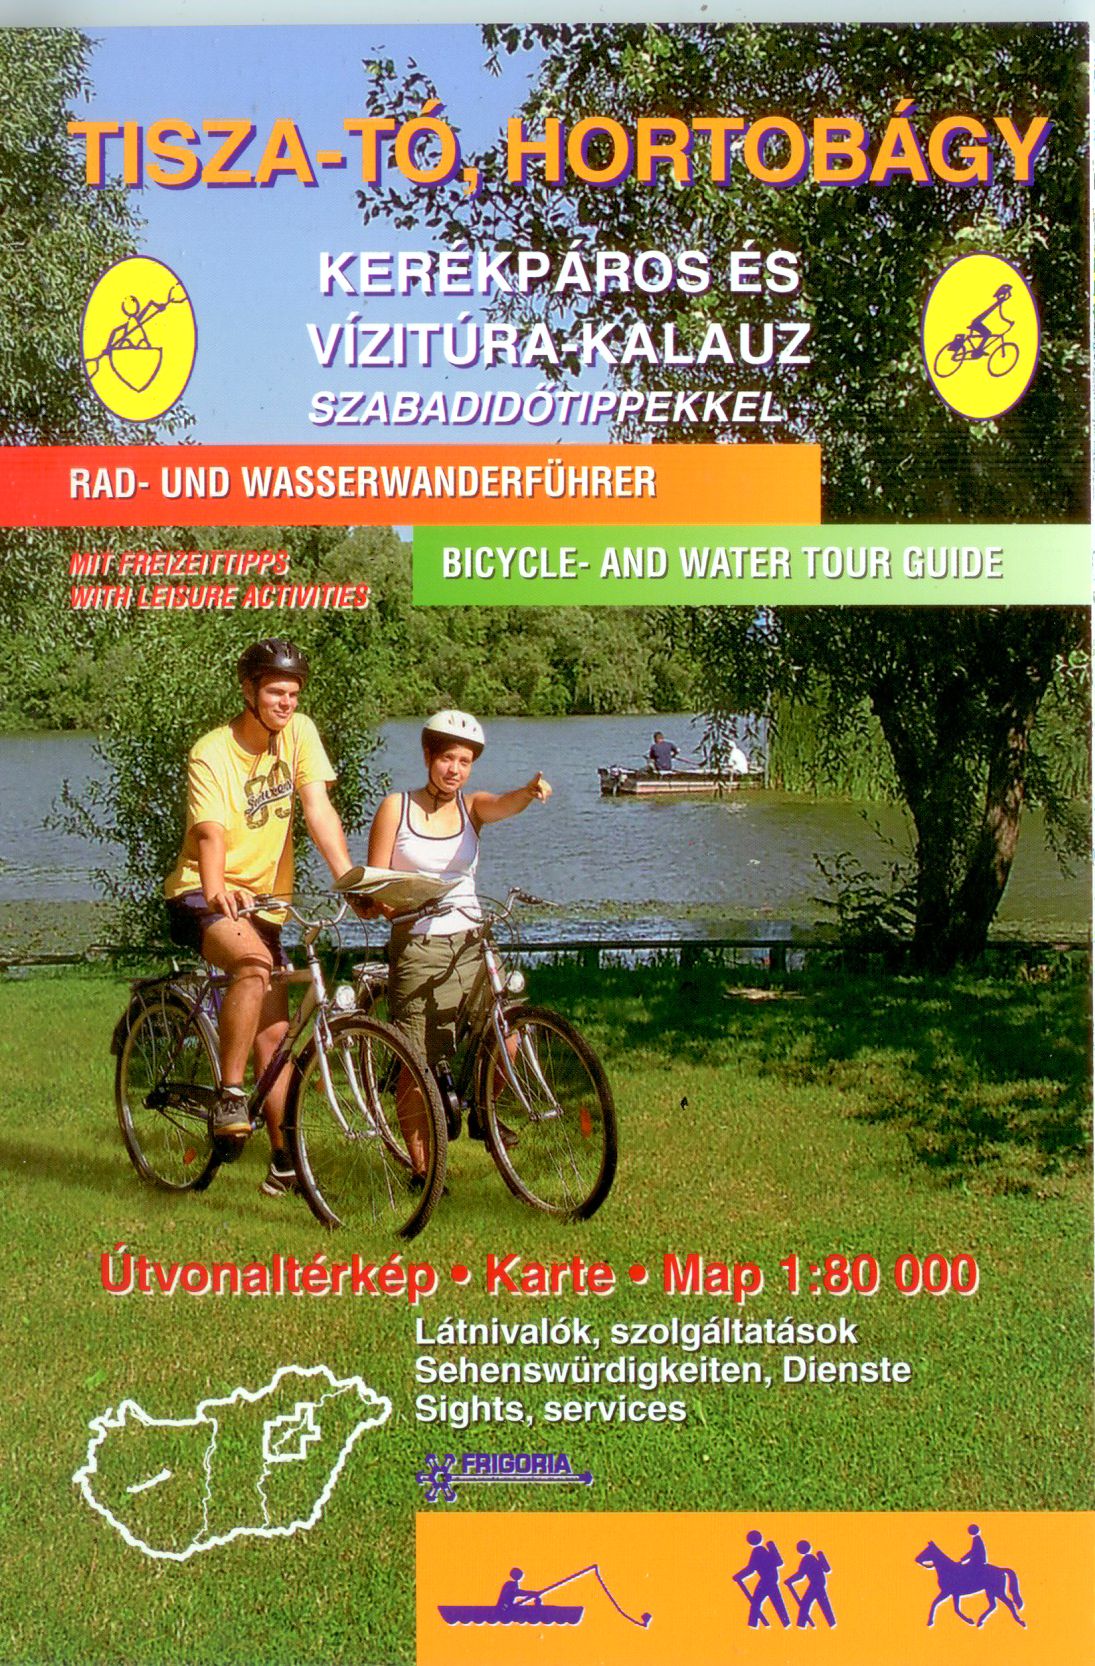 The atlas contains 22 water routes with photos and text in 3 languages (Hungarian, English, German)